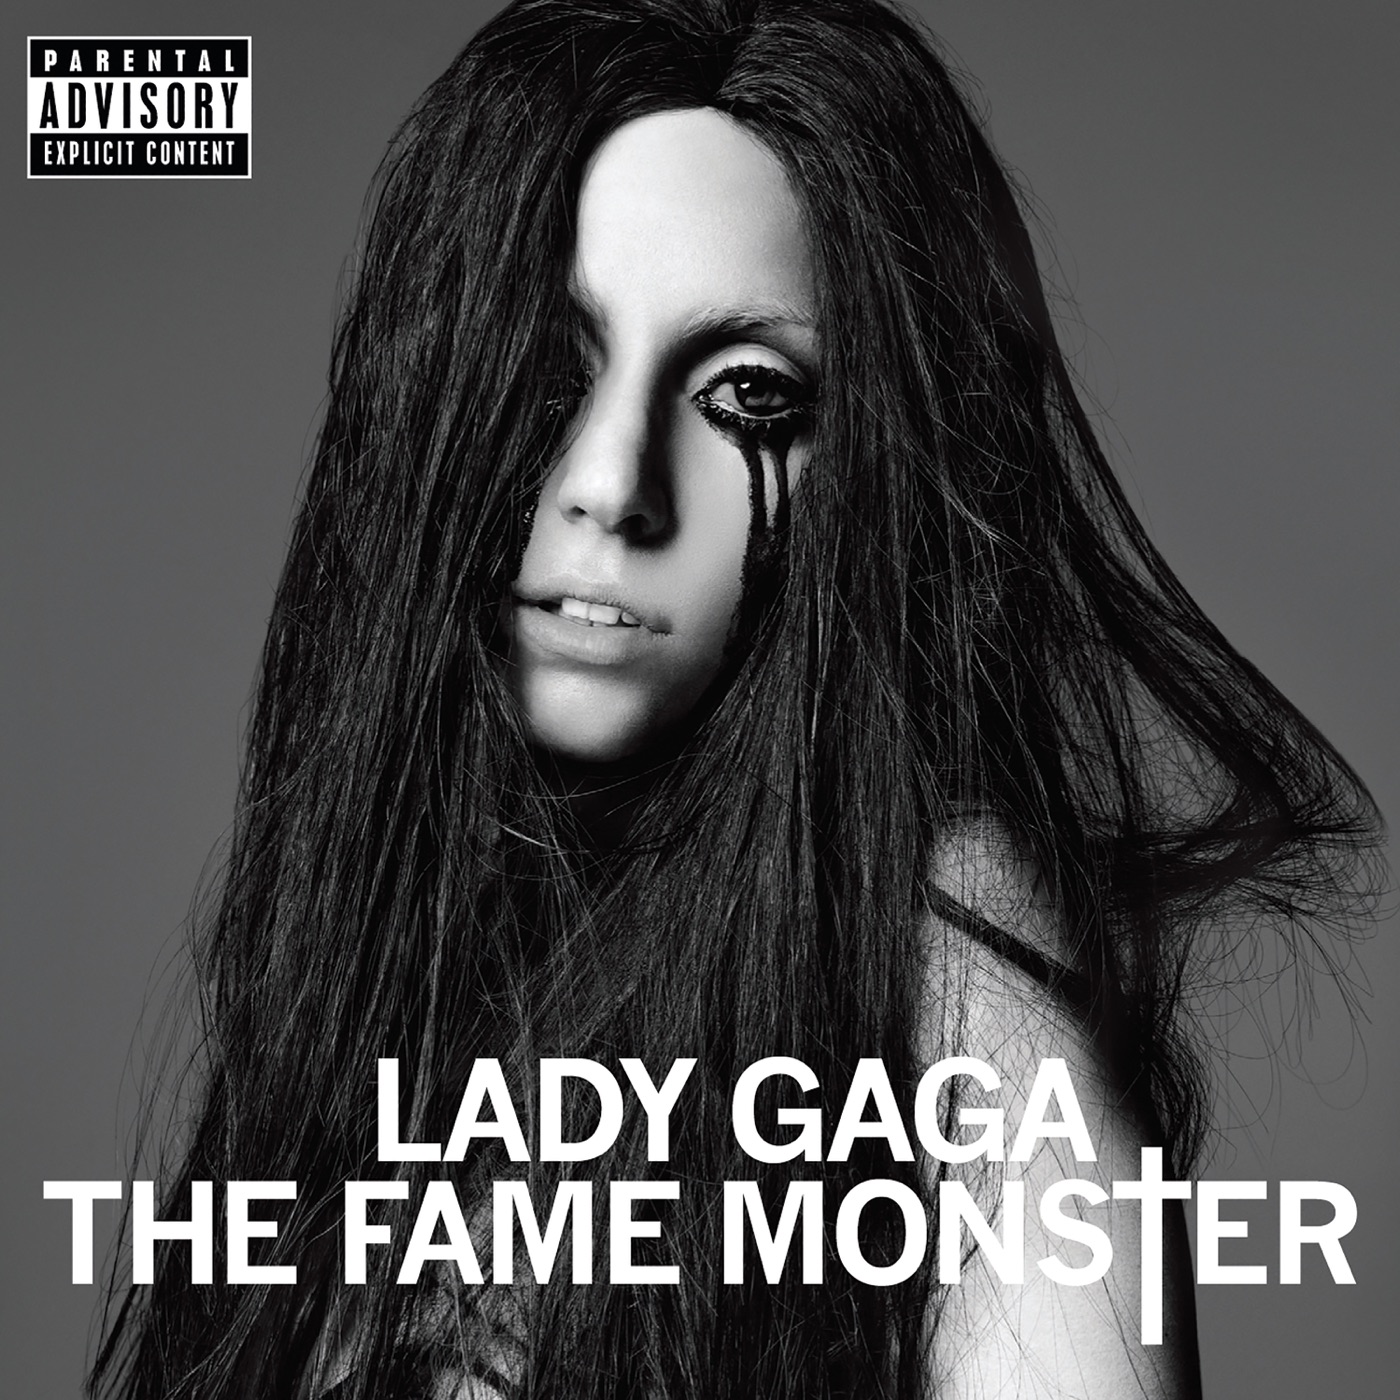 The Fame Monster by Lady Gaga